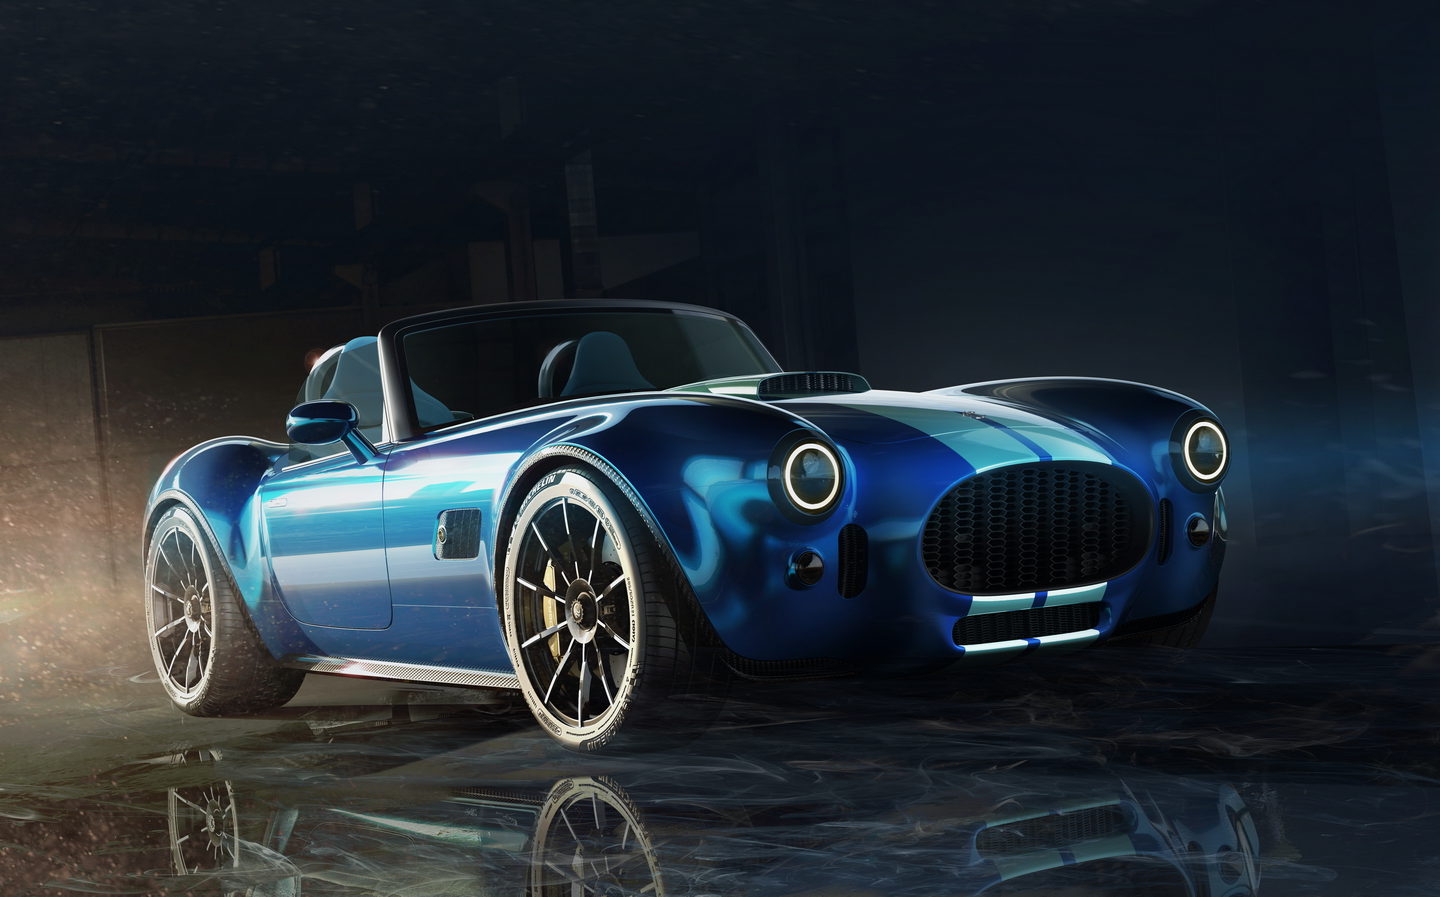 AC Cars retains UK trademark of AC Cobra name following legal battle with Clive Sutton Limited